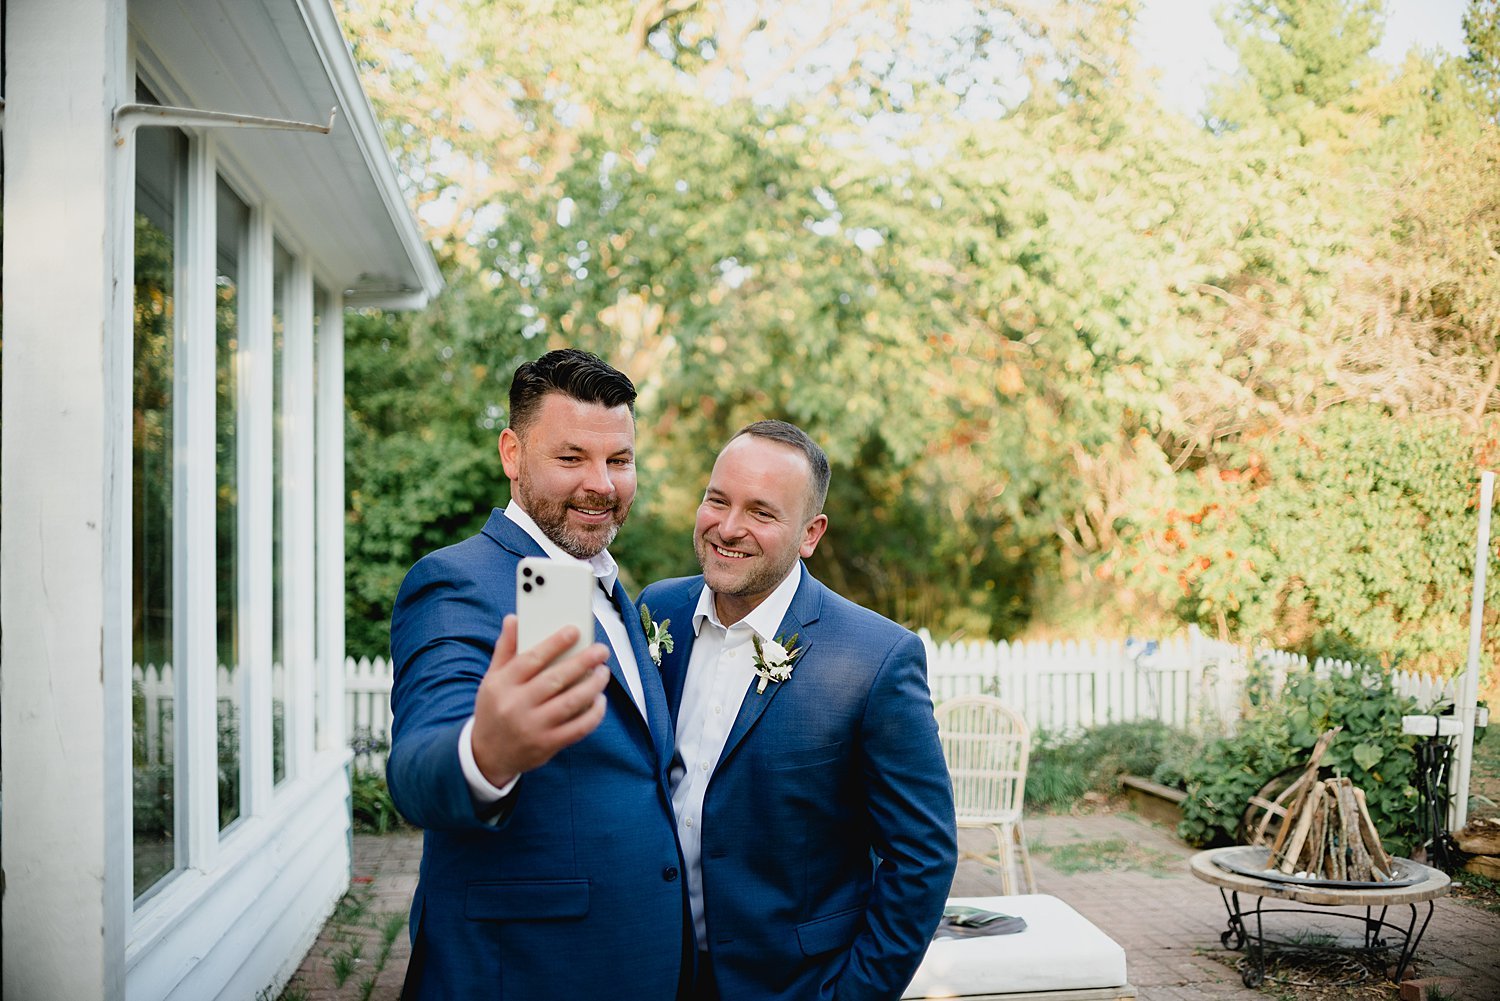 An Intimate Elopement at an Airbnb in Prince Edward County | Prince Edward County Wedding Photographer | Holly McMurter Photographs_0057.jpg